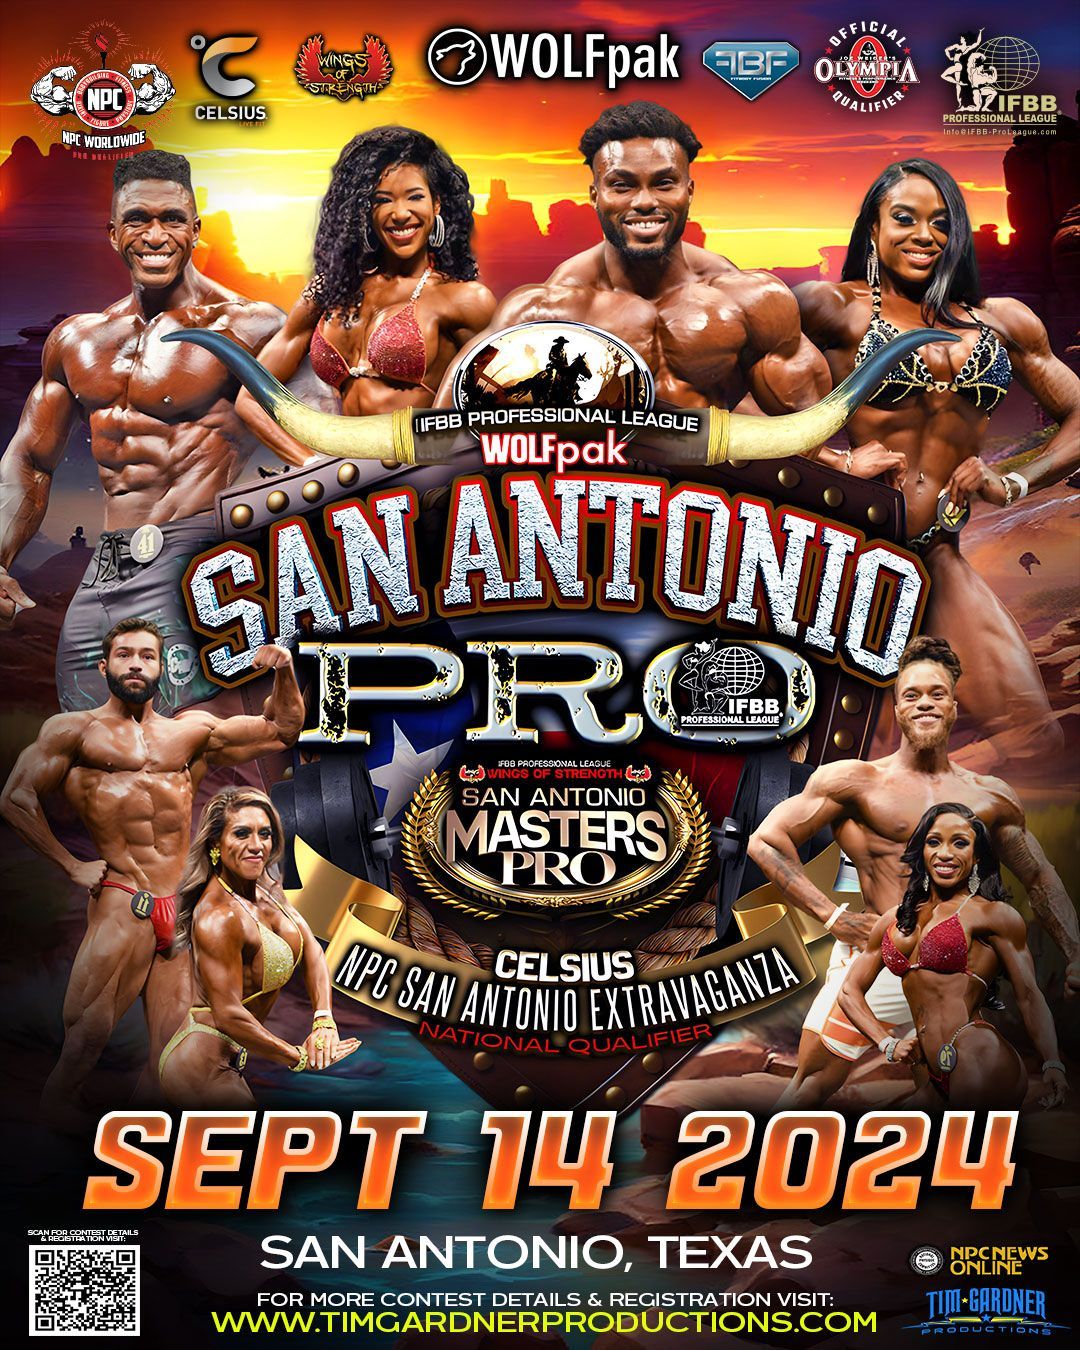 A poster for a bodybuilding competition in san antonio texas.